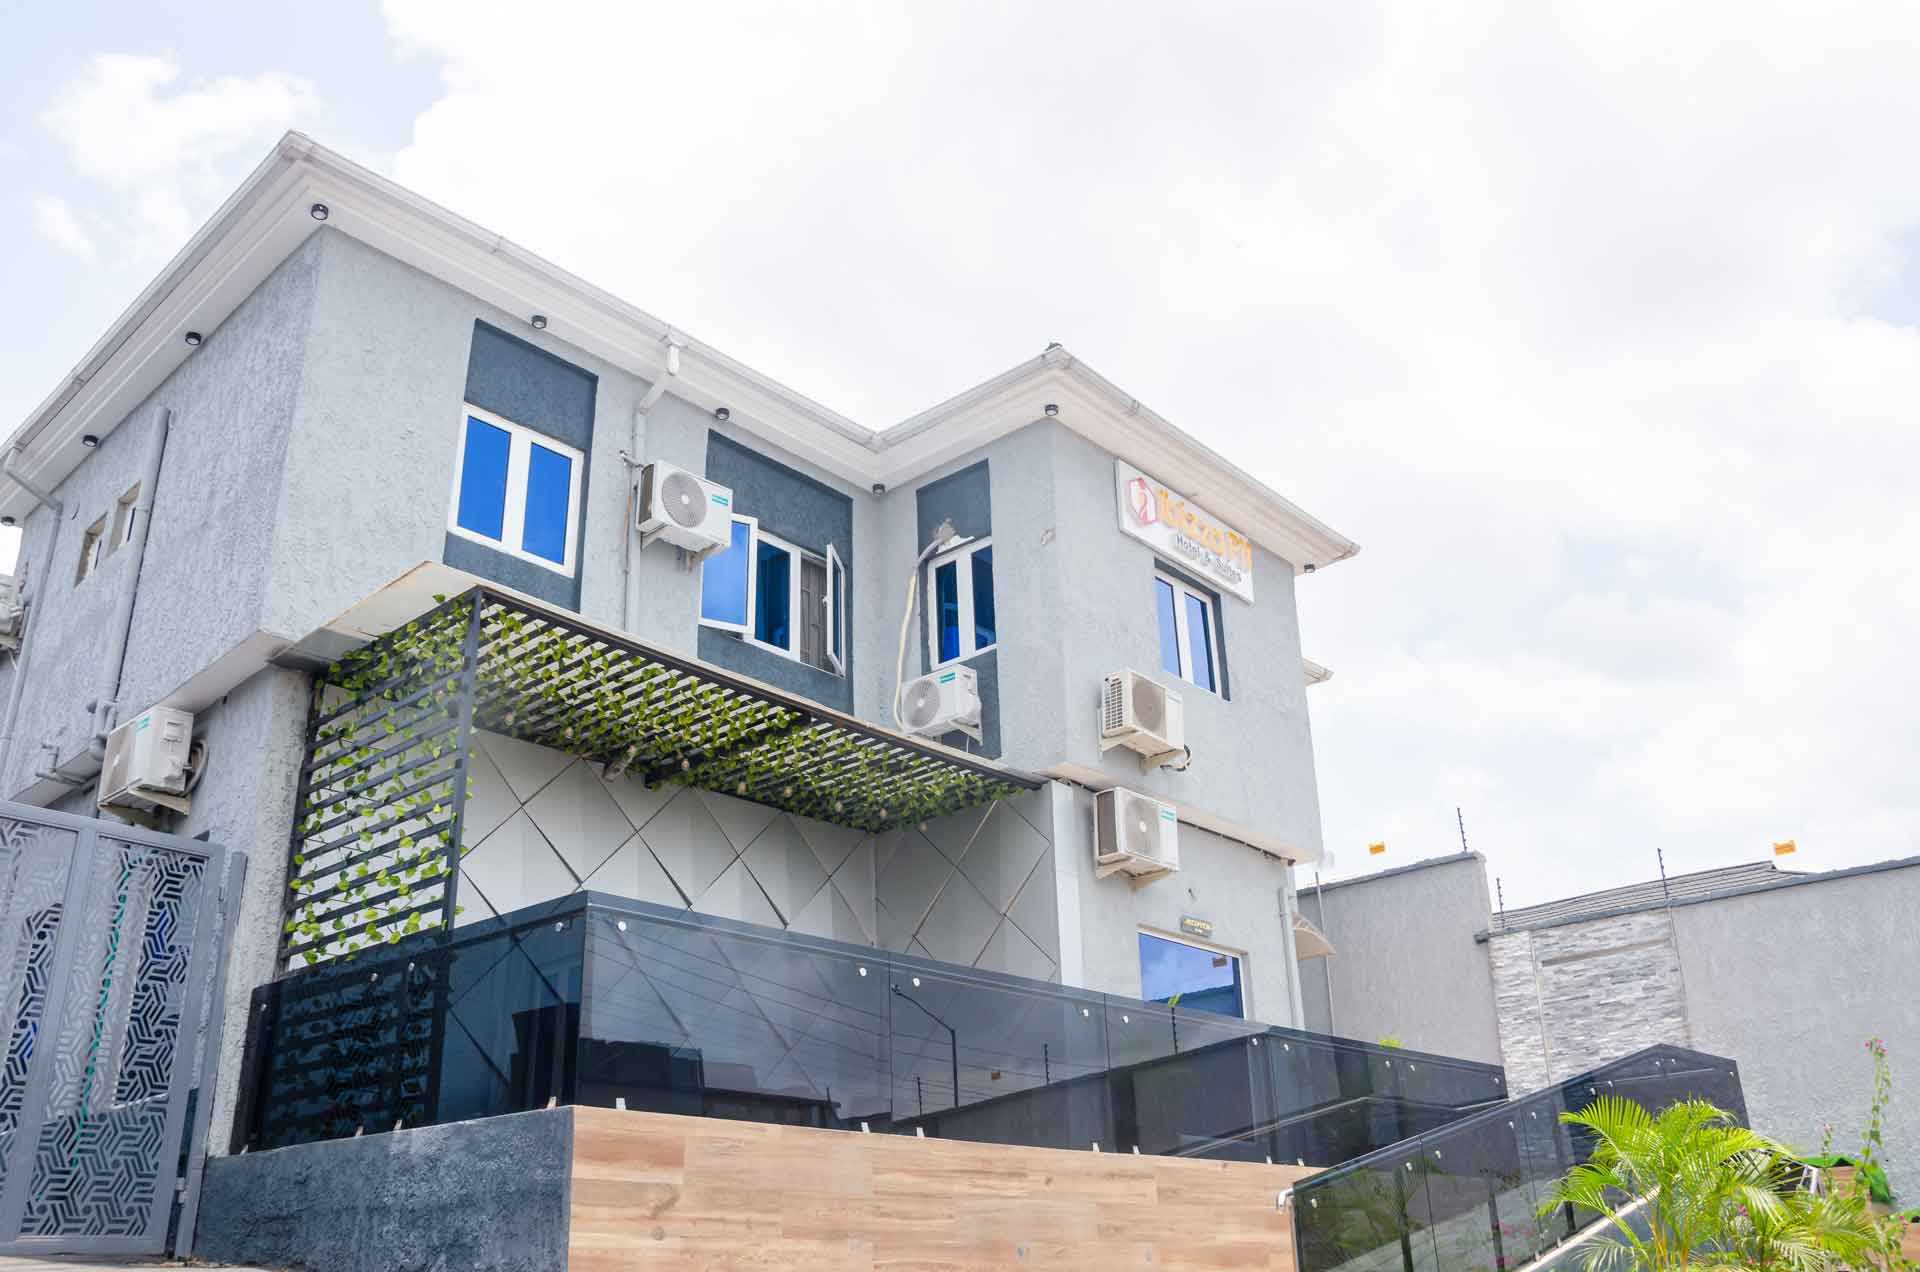 Welcome to our newly built hotel located in Ikotun, Lagos. Strategically situated in a conspicuous spot in the area, we are easily accessible to guests. Ibizza Pit hotel is designed with modern facilities to ensure a comfortable stay for all our guests.